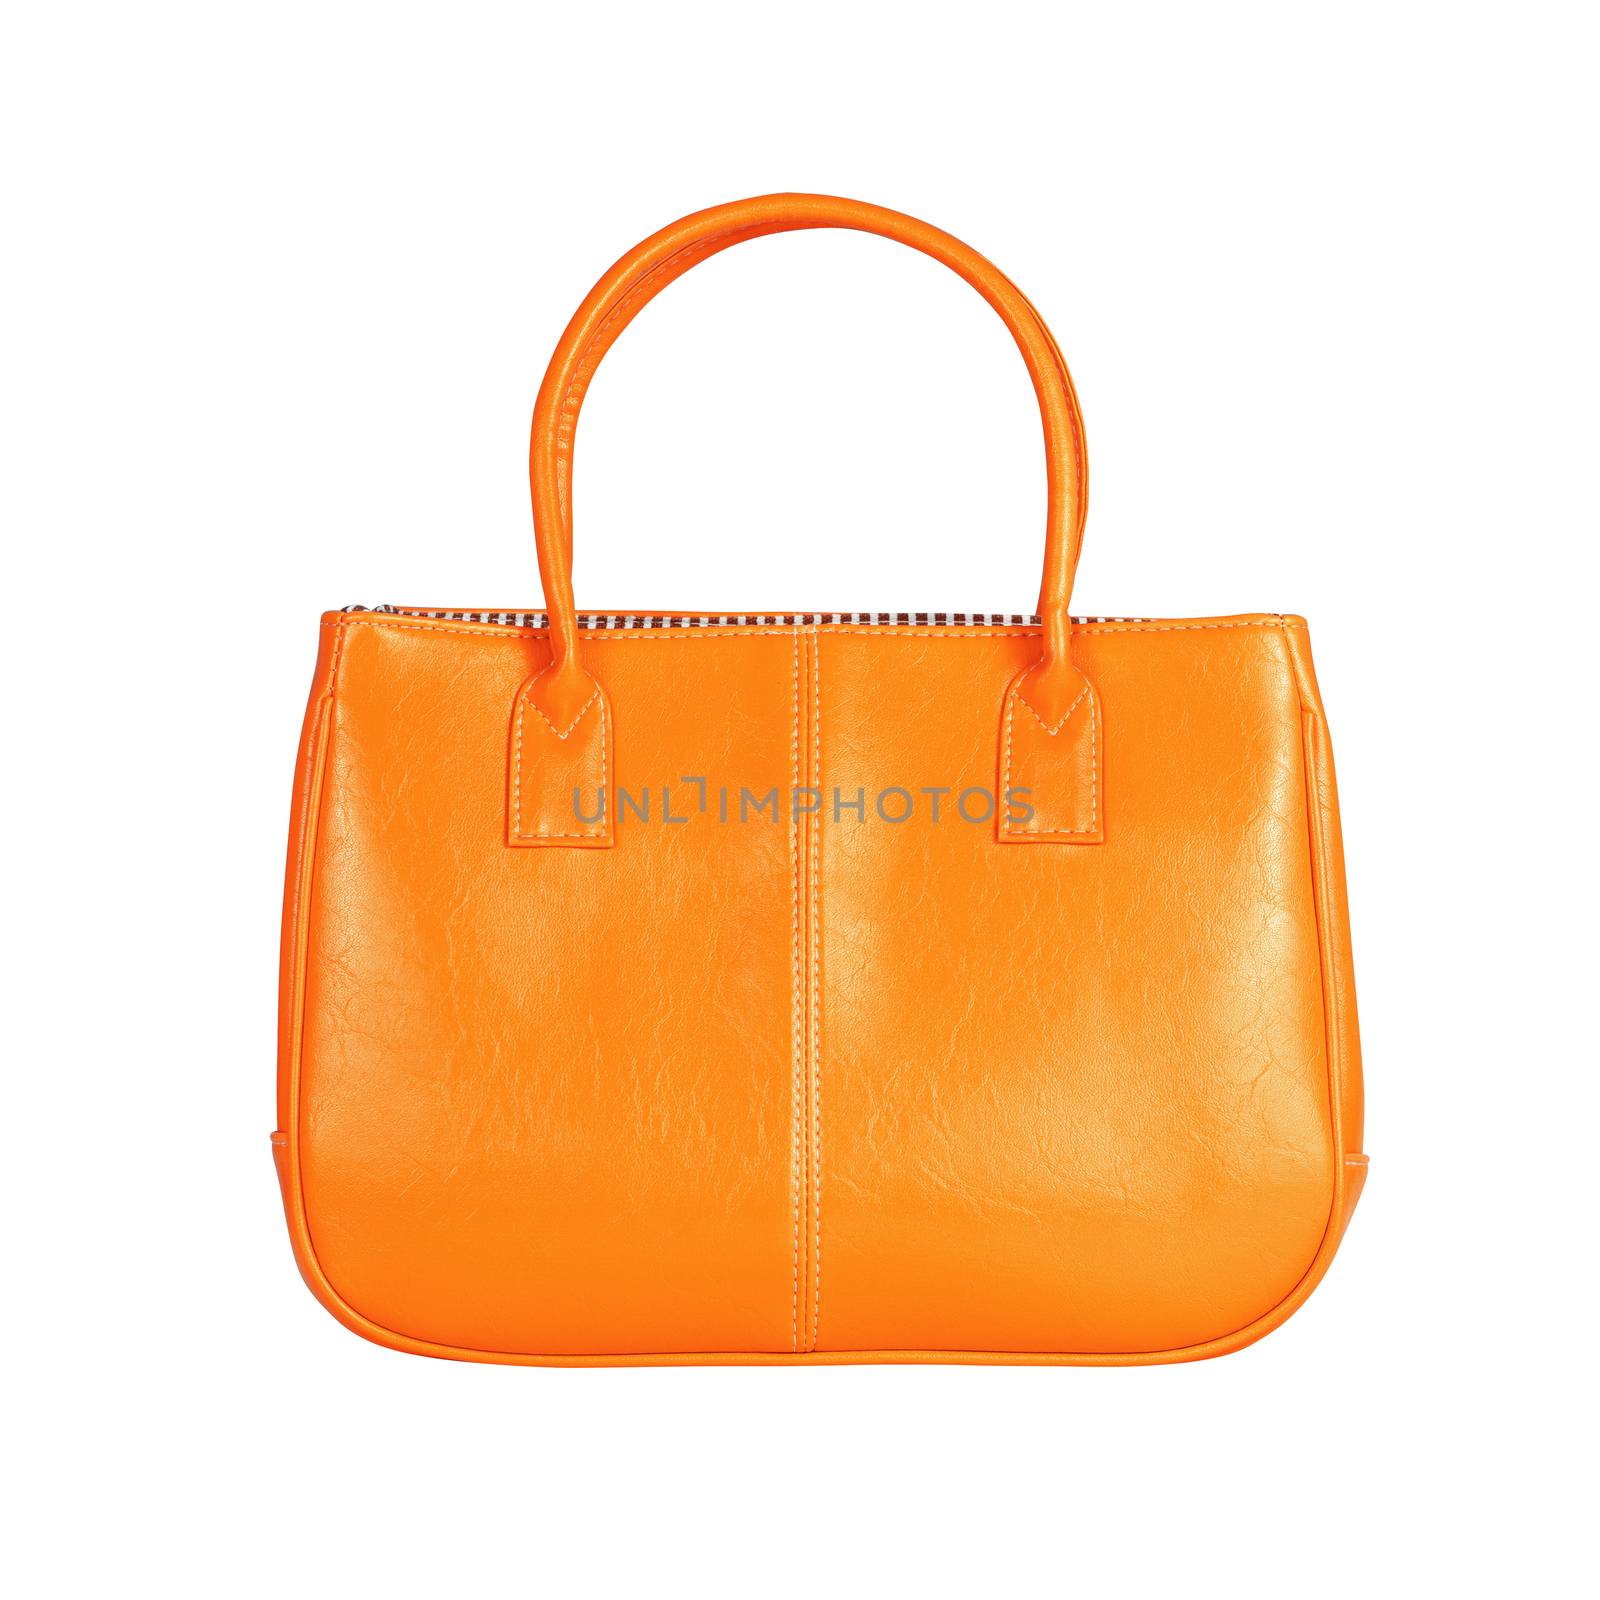 High-resolution image of an isolated orange leather handbag on white background. High-quality clipping path included.